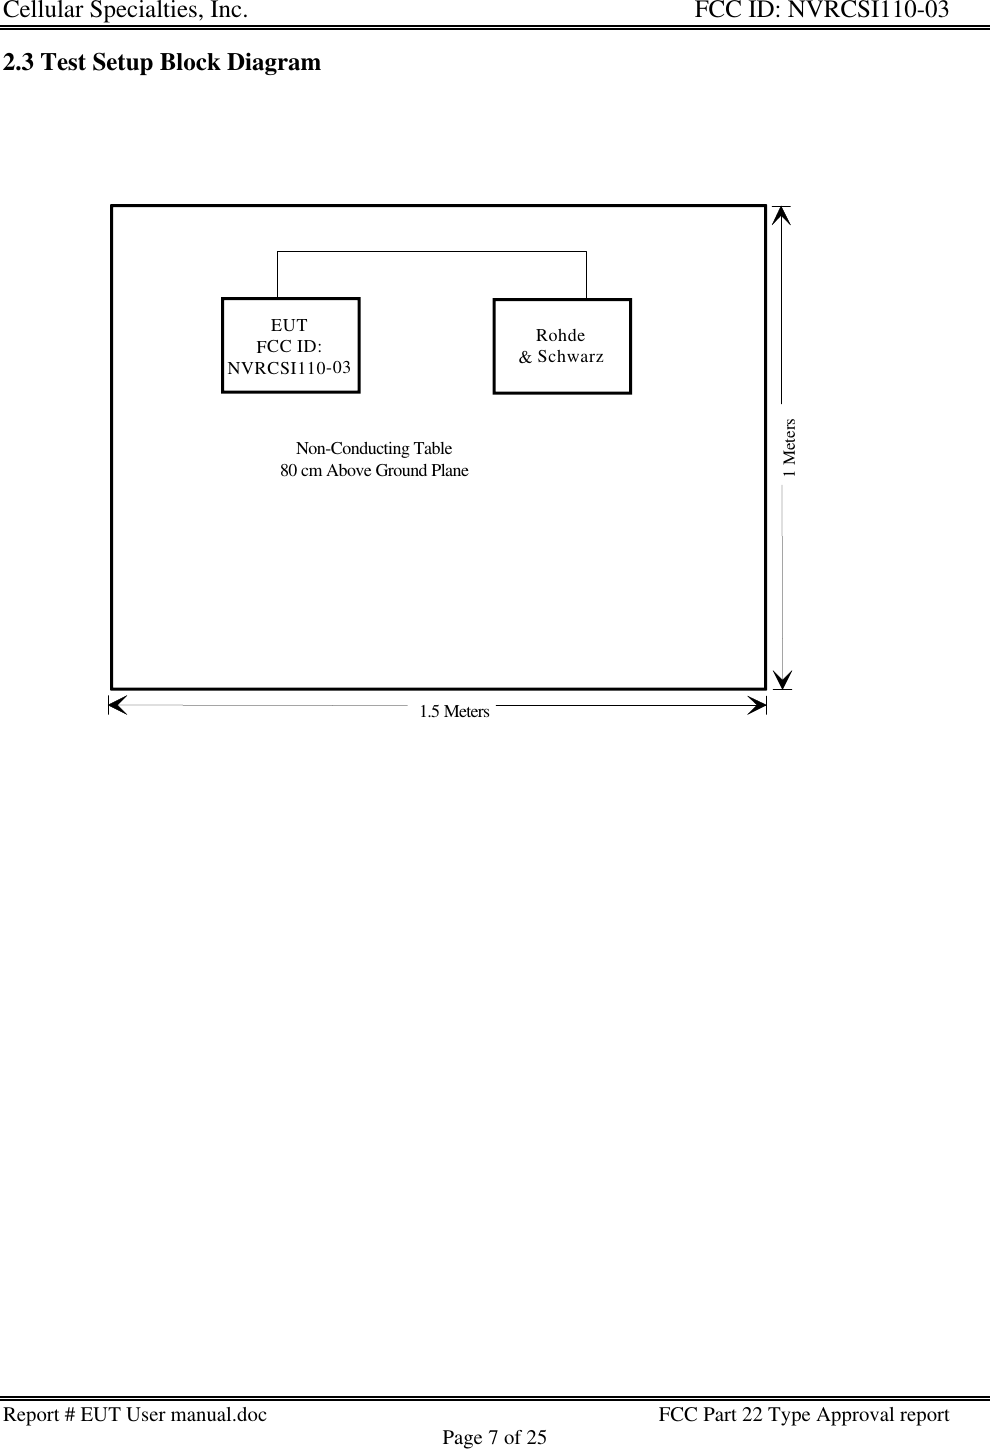 Cellular Specialties, Inc. FCC ID: NVRCSI110-03Report # EUT User manual.doc FCC Part 22 Type Approval reportPage 7 of 252.3 Test Setup Block Diagram1.5 MetersNon-Conducting Table80 cm Above Ground Plane1 MetersEUTFCC ID:NVRCSI110-03Rohde &amp; Schwarz